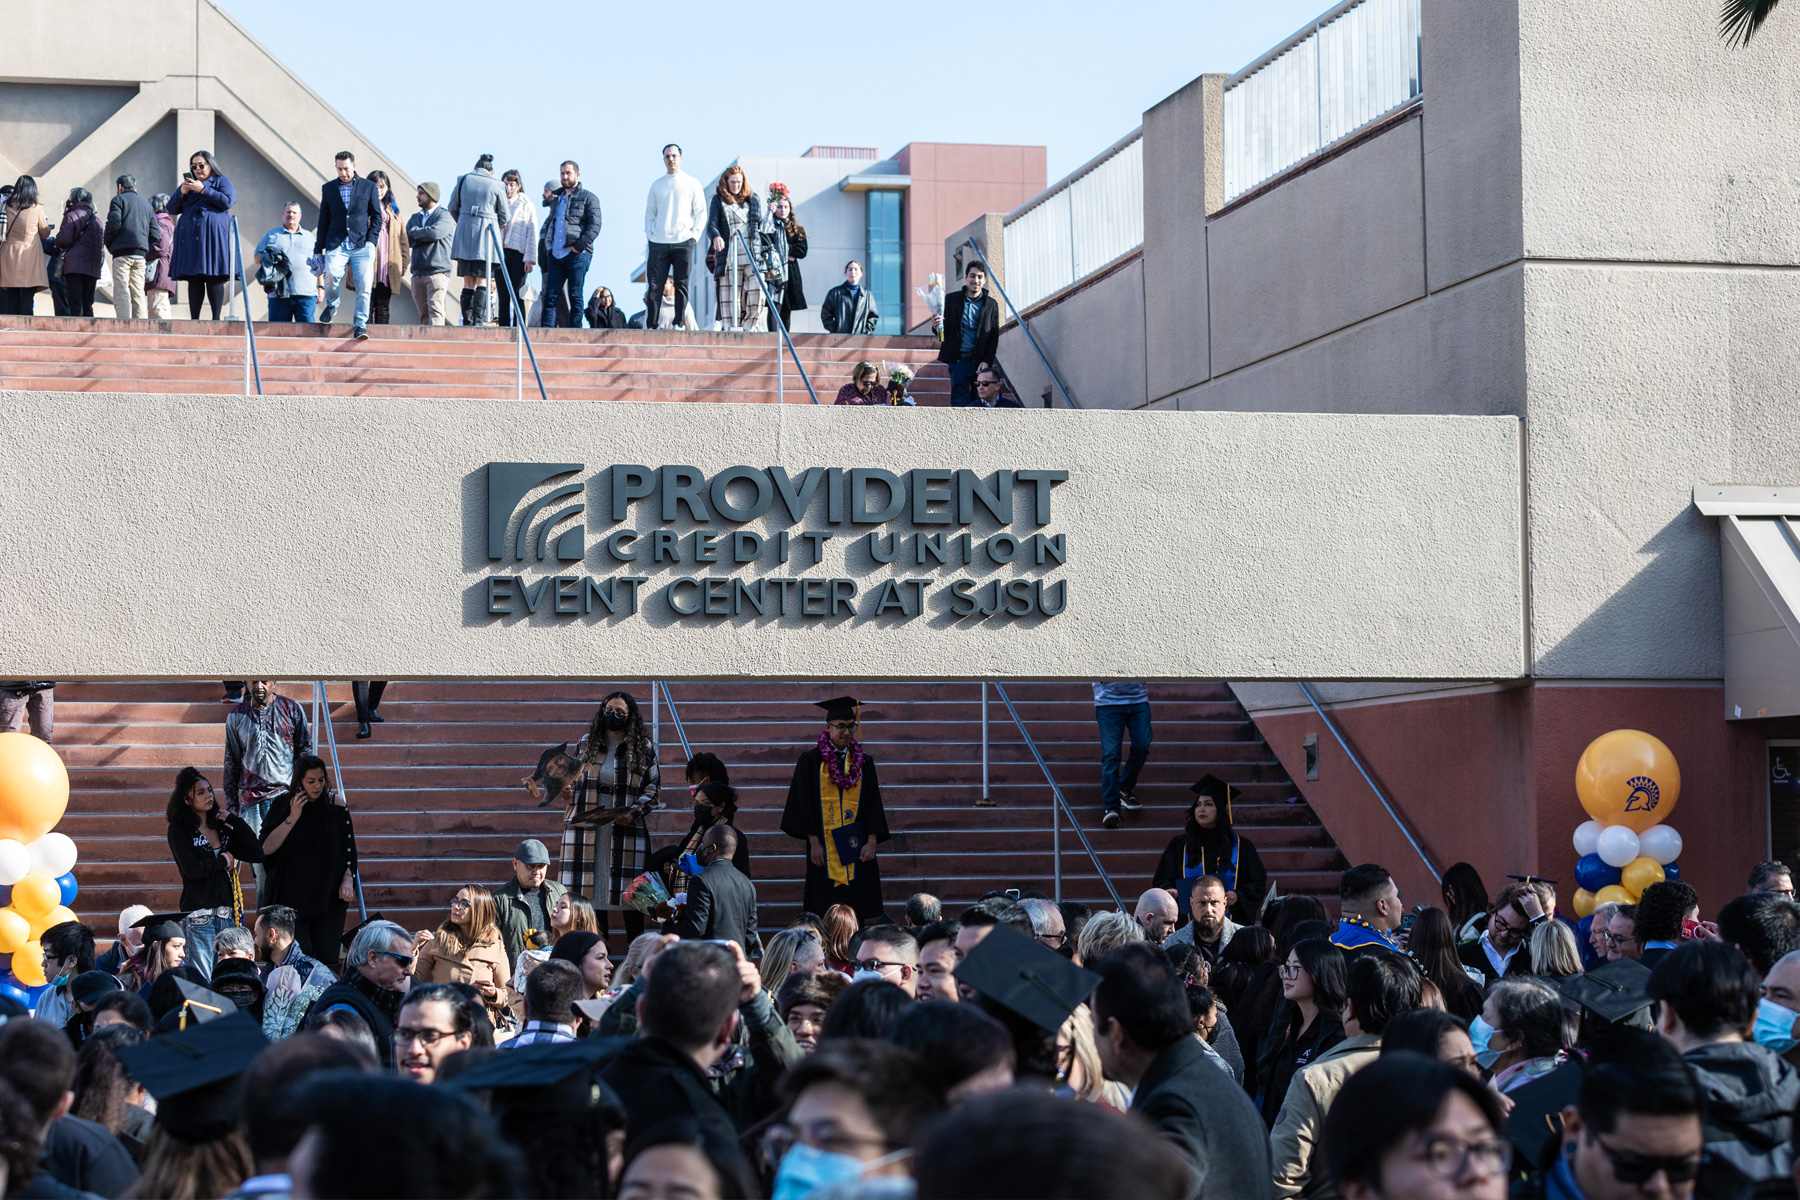 The Provident Credit Union Event Center at San Jose State University.